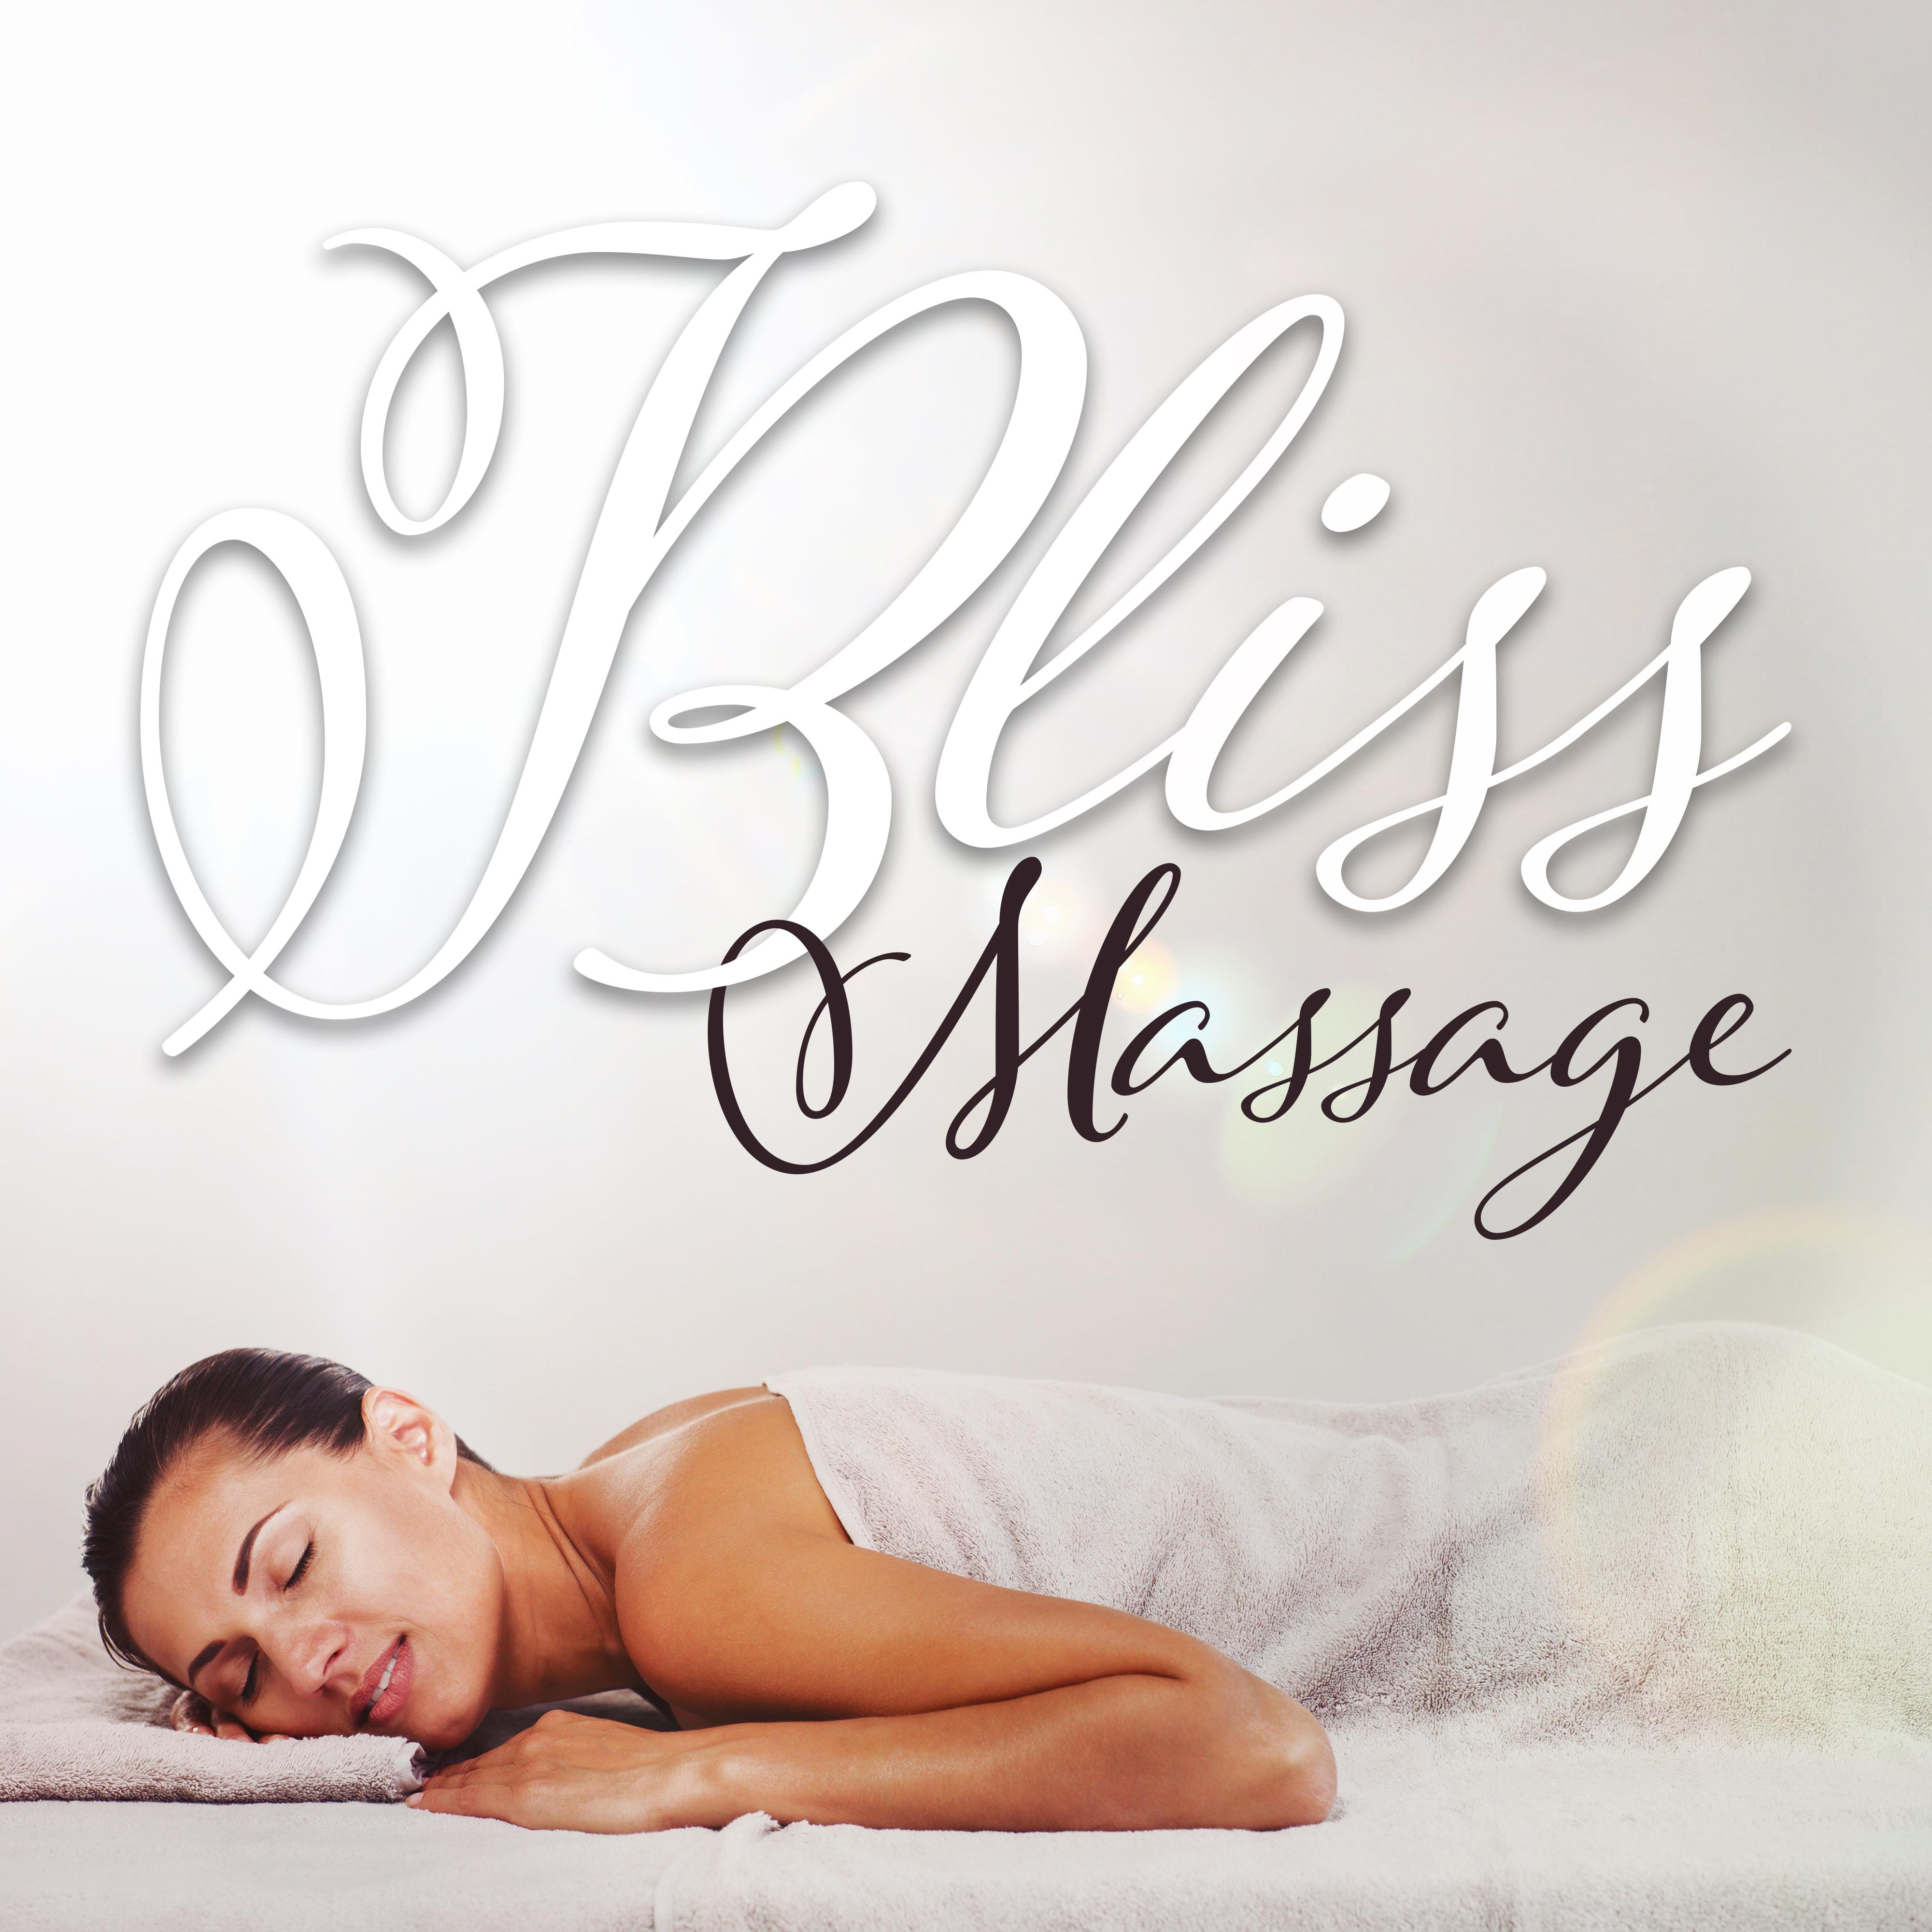 Bliss Massage  Pure Relaxation, Peaceful Nature Sounds, Music for Hotel Spa  Wellness, Massage Background Music